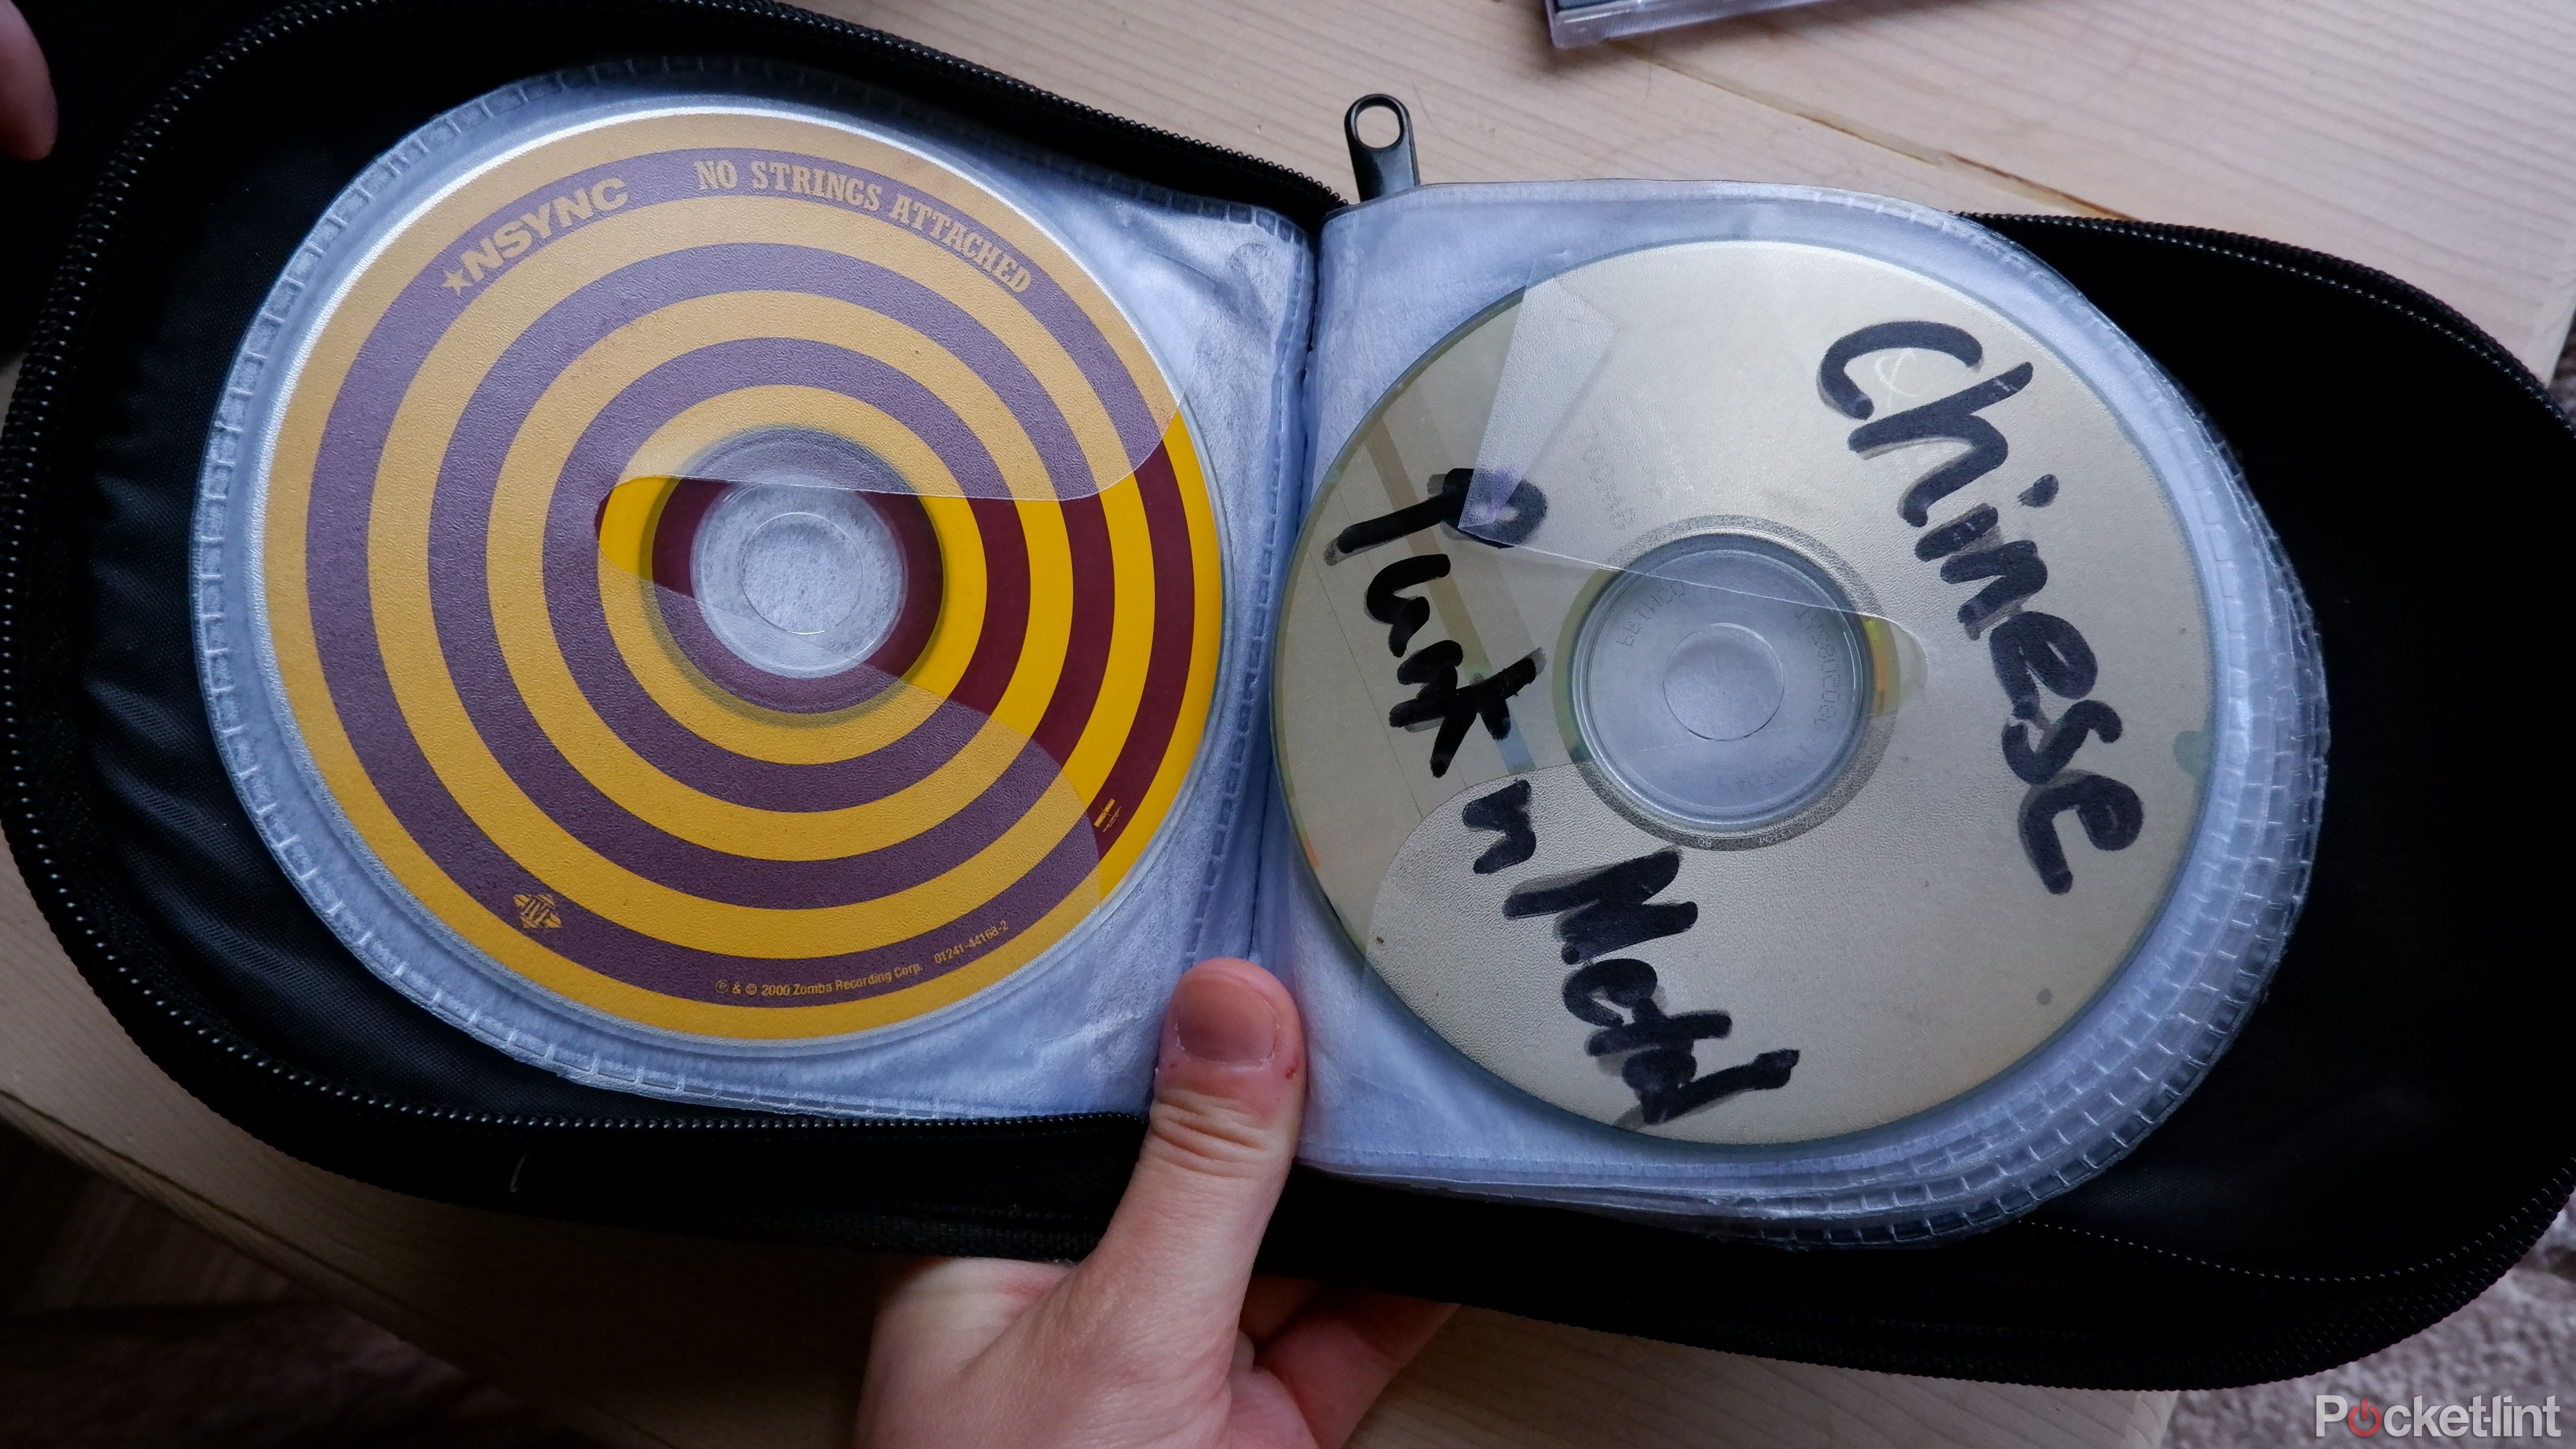 A travel CD case with an NSYNC CD in it